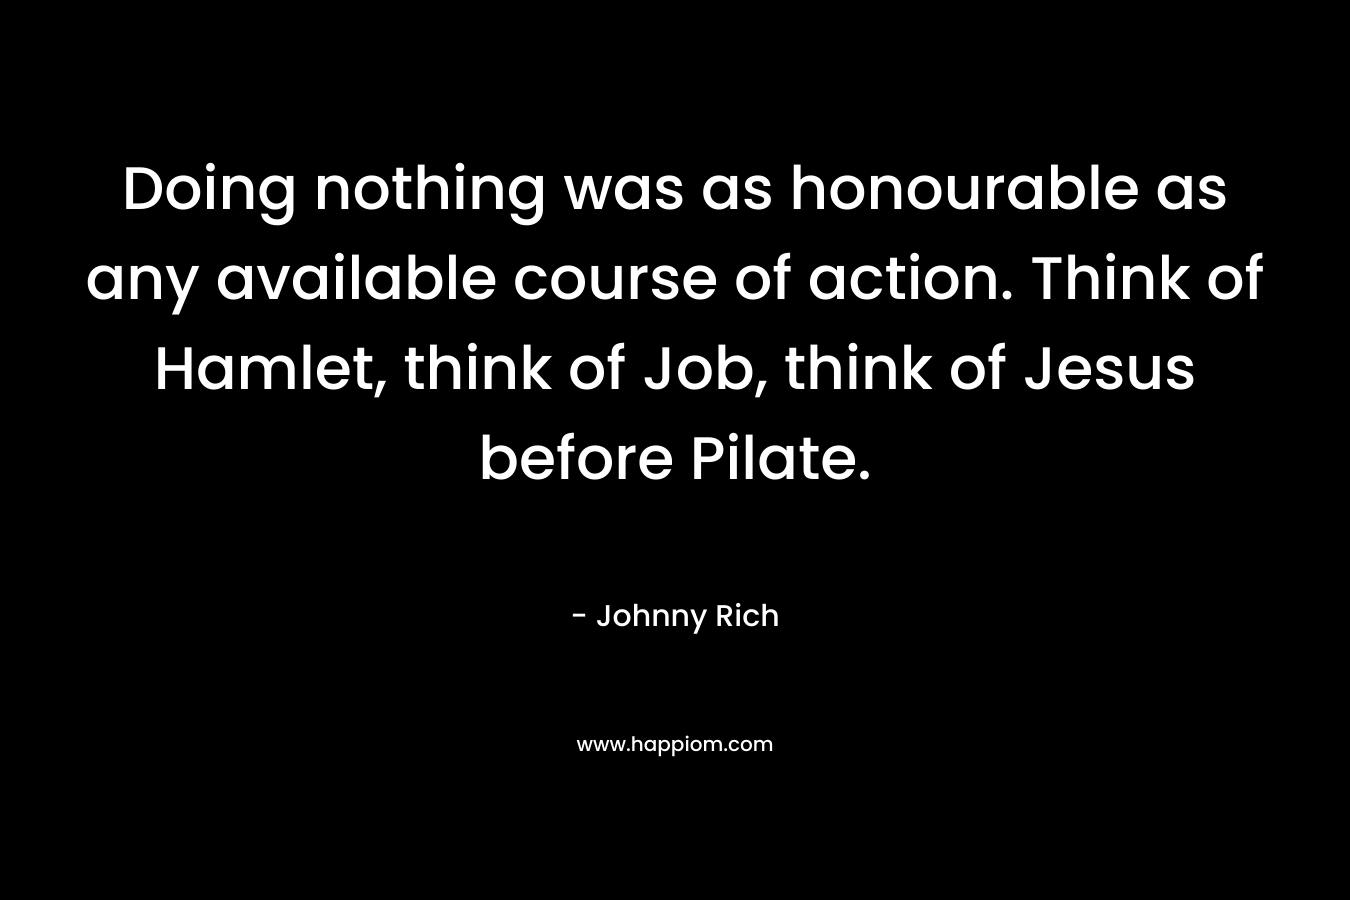 Doing nothing was as honourable as any available course of action. Think of Hamlet, think of Job, think of Jesus before Pilate.